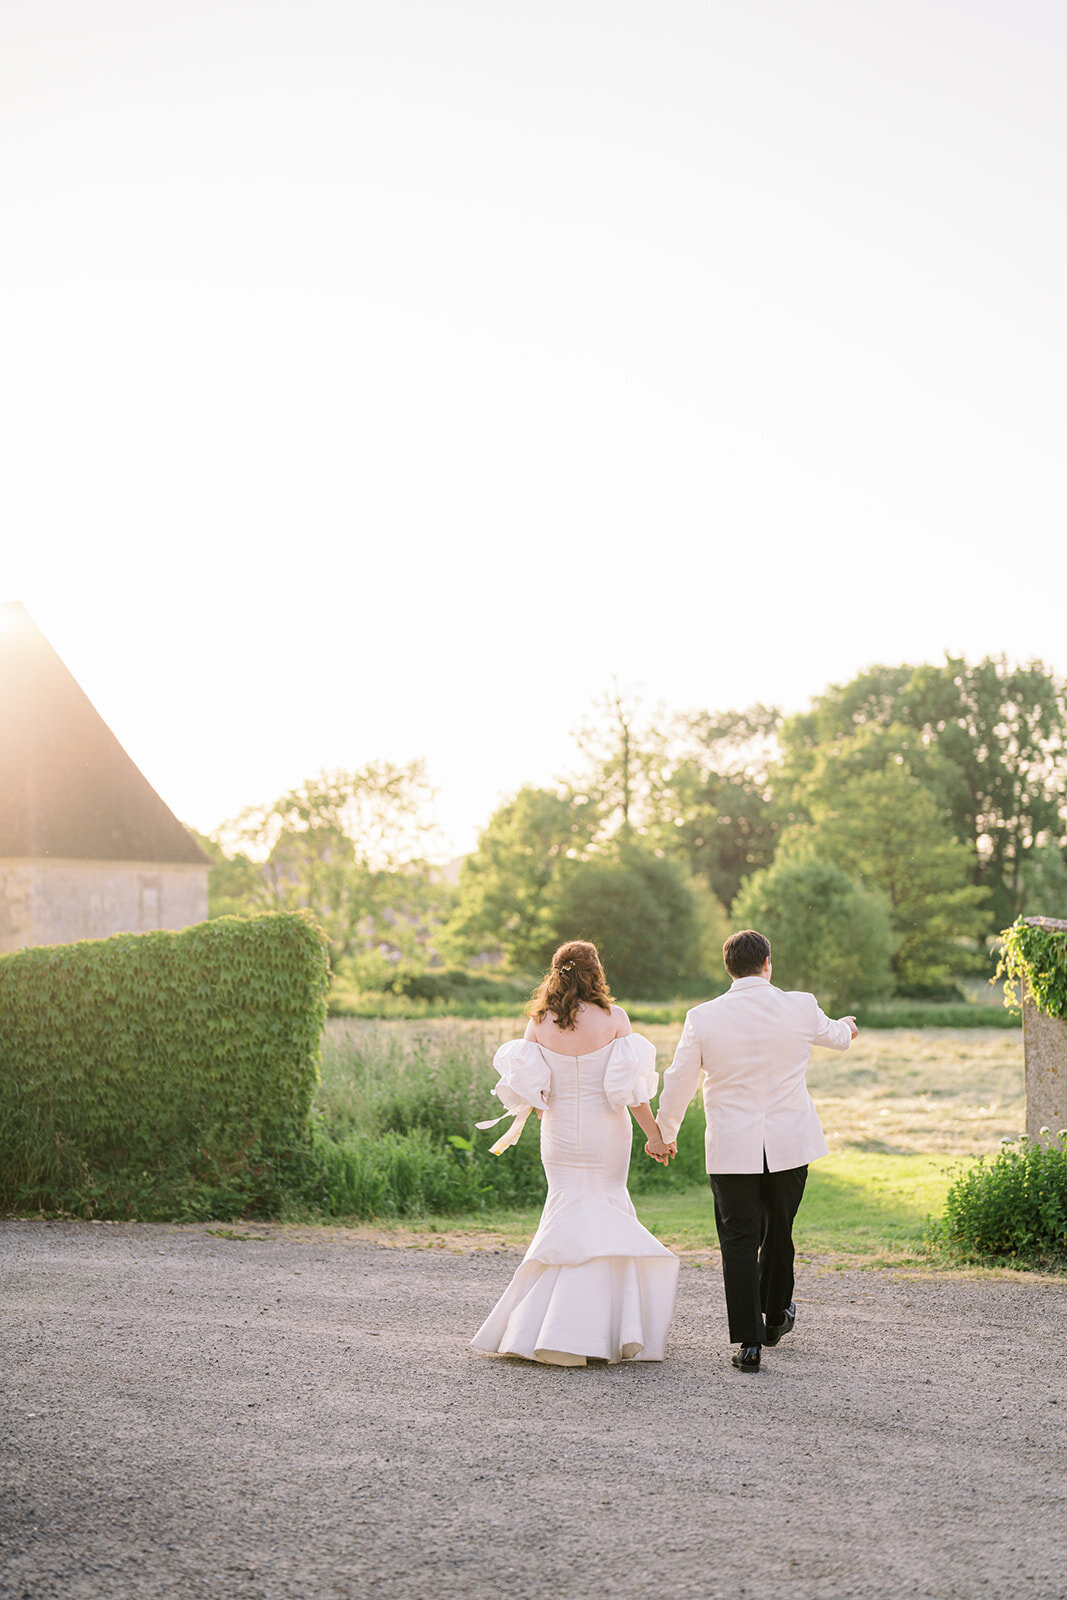 Jennifer Fox Weddings English speaking wedding planning & design agency in France crafting refined and bespoke weddings and celebrations Provence, Paris and destination A&T's Wedding - Harriette Earnshaw Photography-919